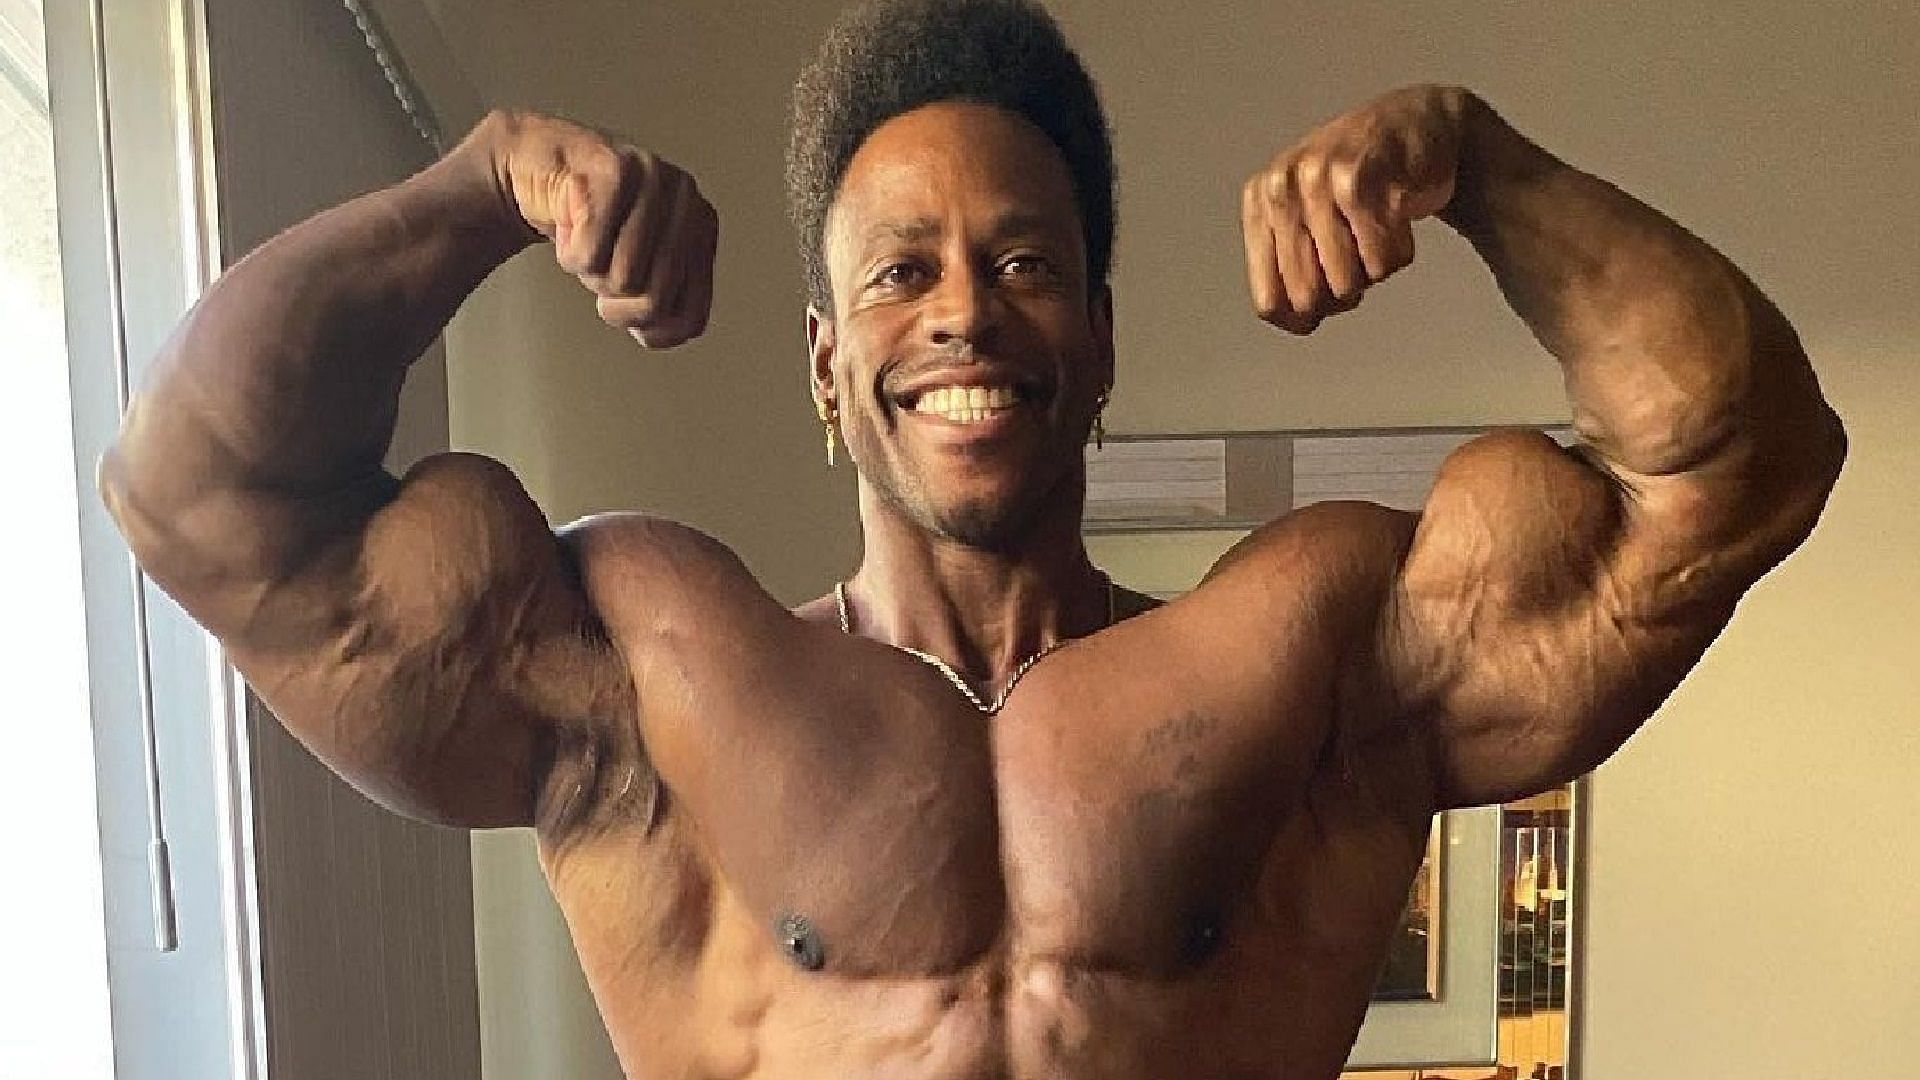 Breon Ansley flexing his muscle